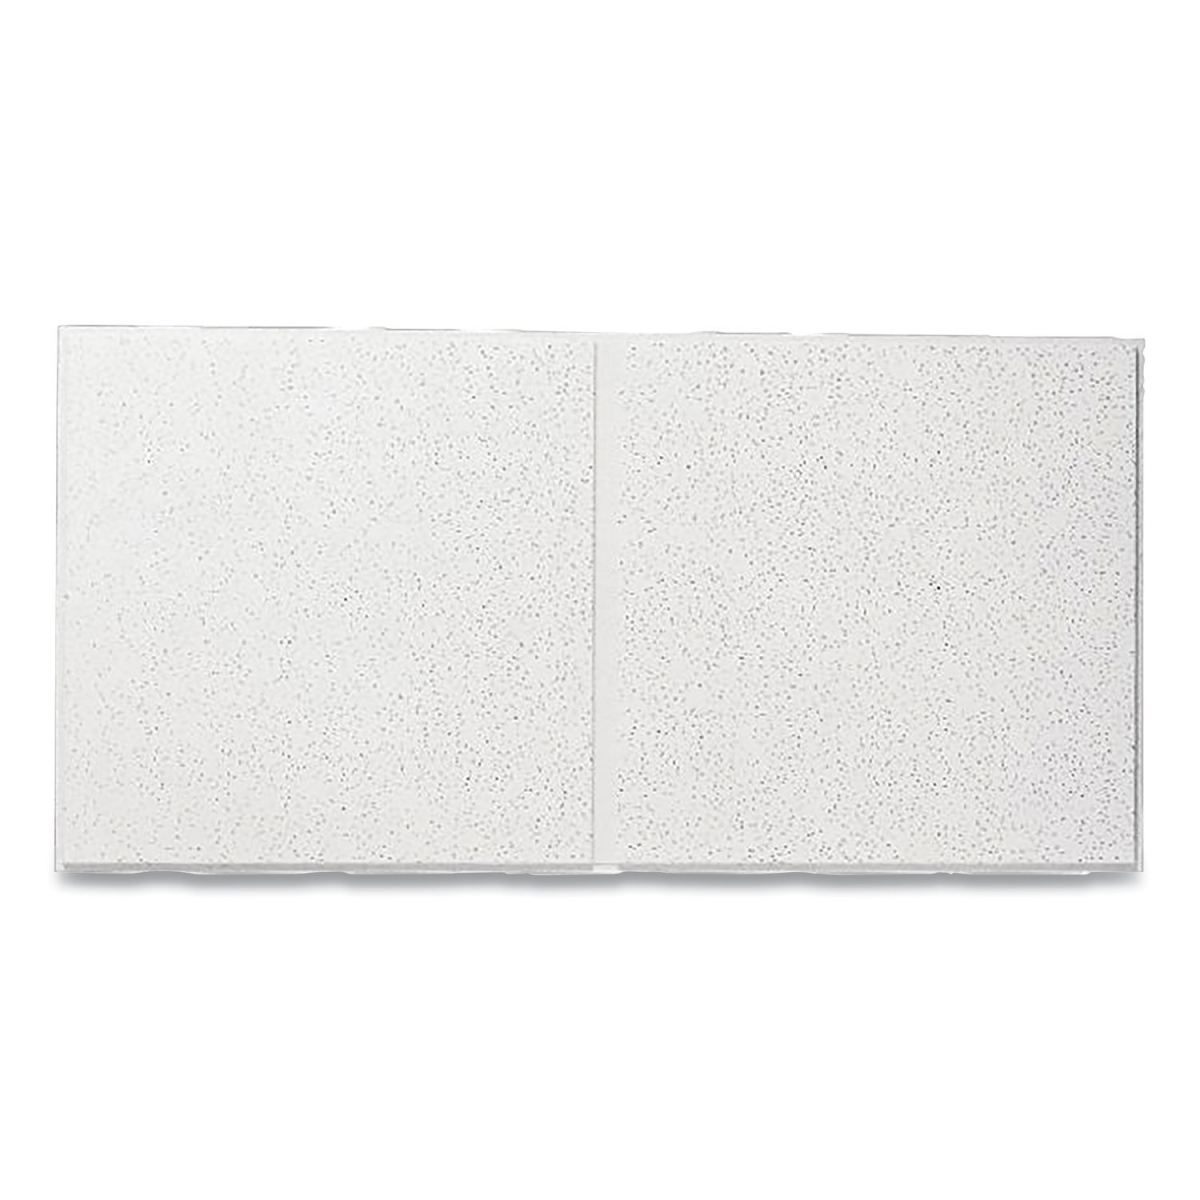 Picture of Armstrong 1761C 2 x 4 ft. Angled Tegular Directional Fine Fissured Second Look Ceiling Tiles- 10 per Case